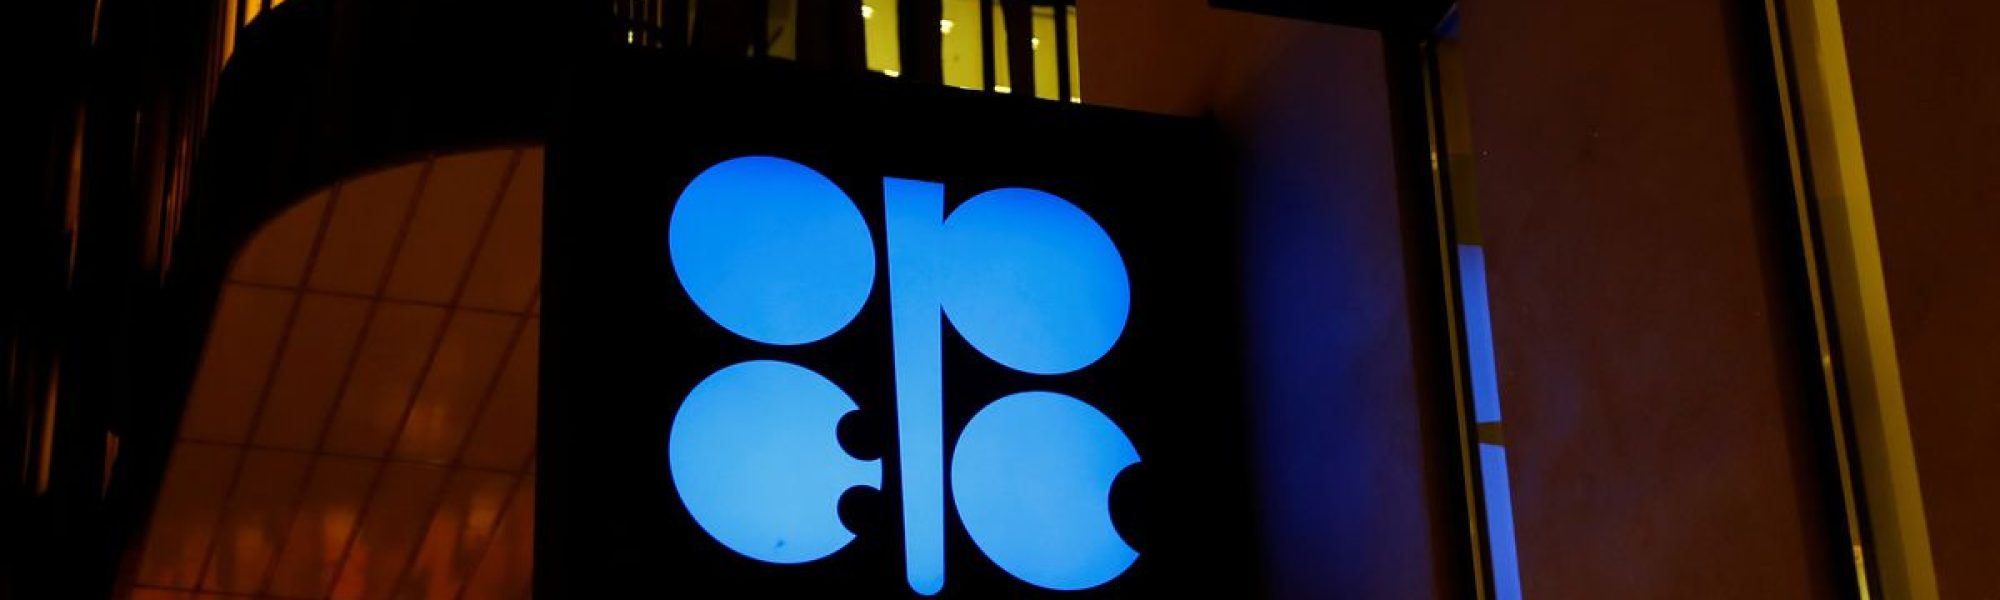 Explainer: Why Russia stands to gain most from OPEC+ oil production cuts